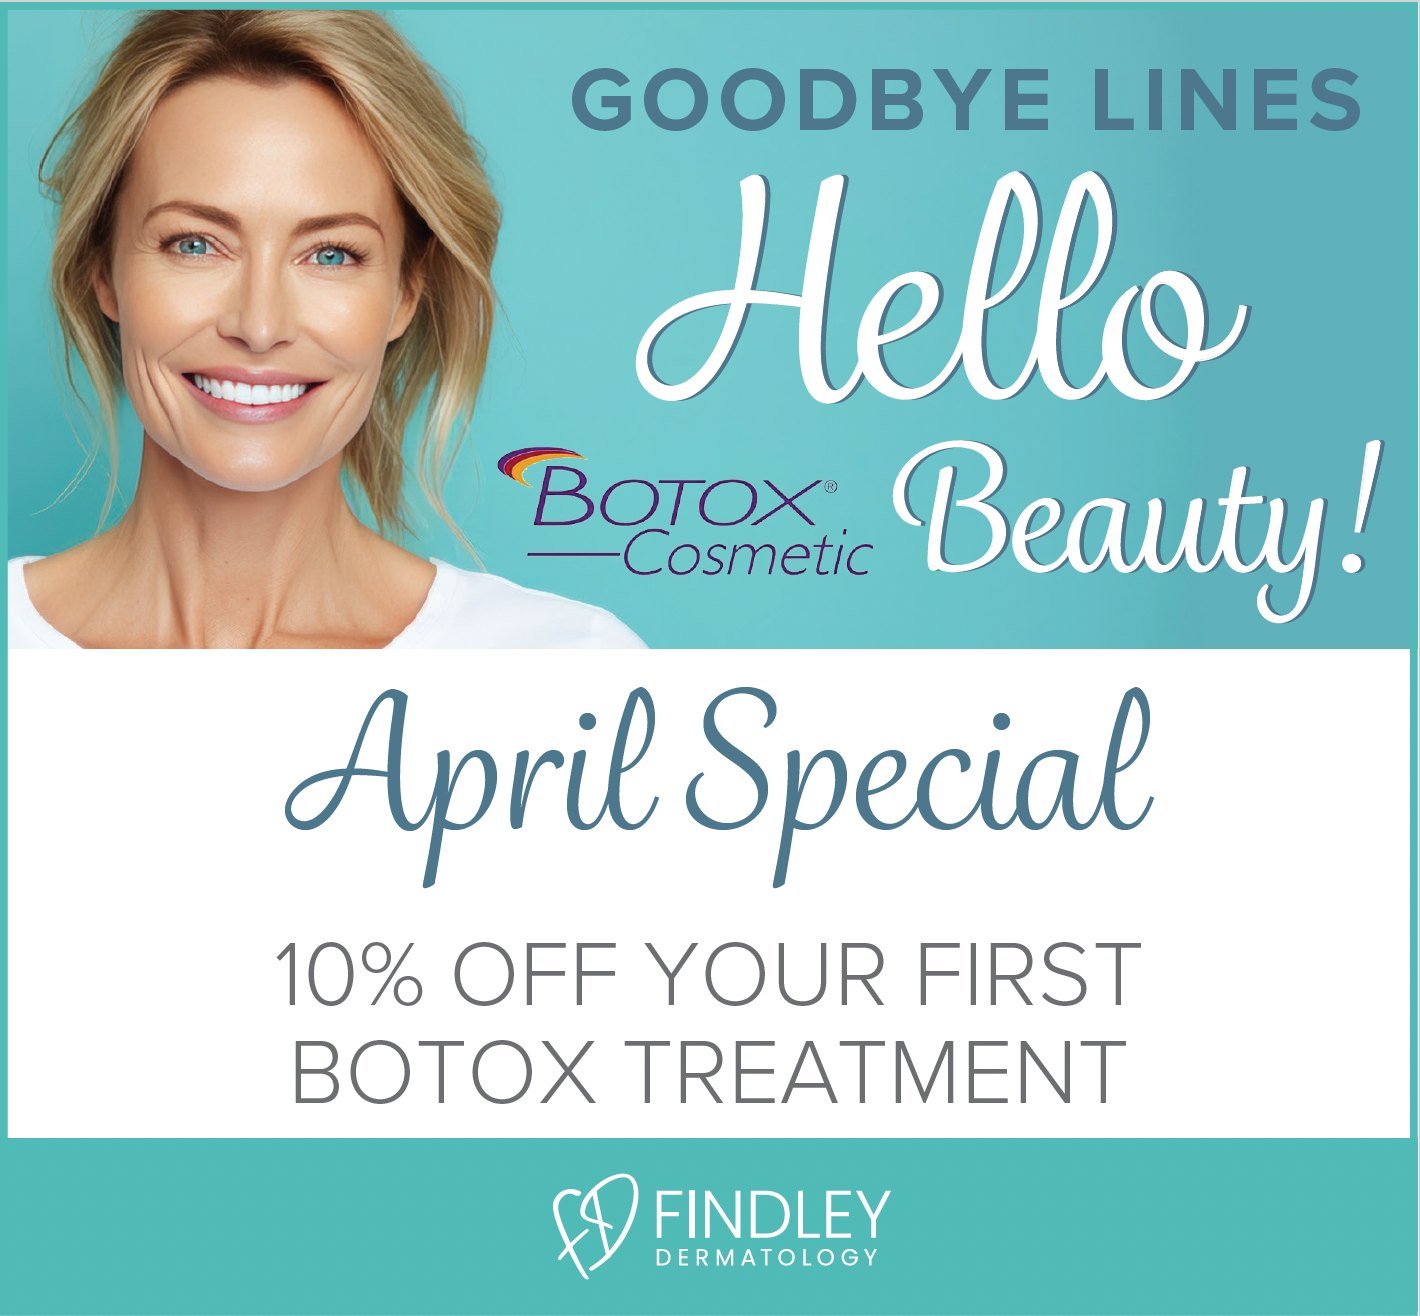 ⏰ Only One Week Left! ⏰ Don't miss out on our April special: 10% off your first Botox treatment! Say goodbye to wrinkles and hello to smoother, younger-looking skin. Botox can:

✨ Reduce fine lines and wrinkles
✨ Prevent new wrinkles from forming
✨ P